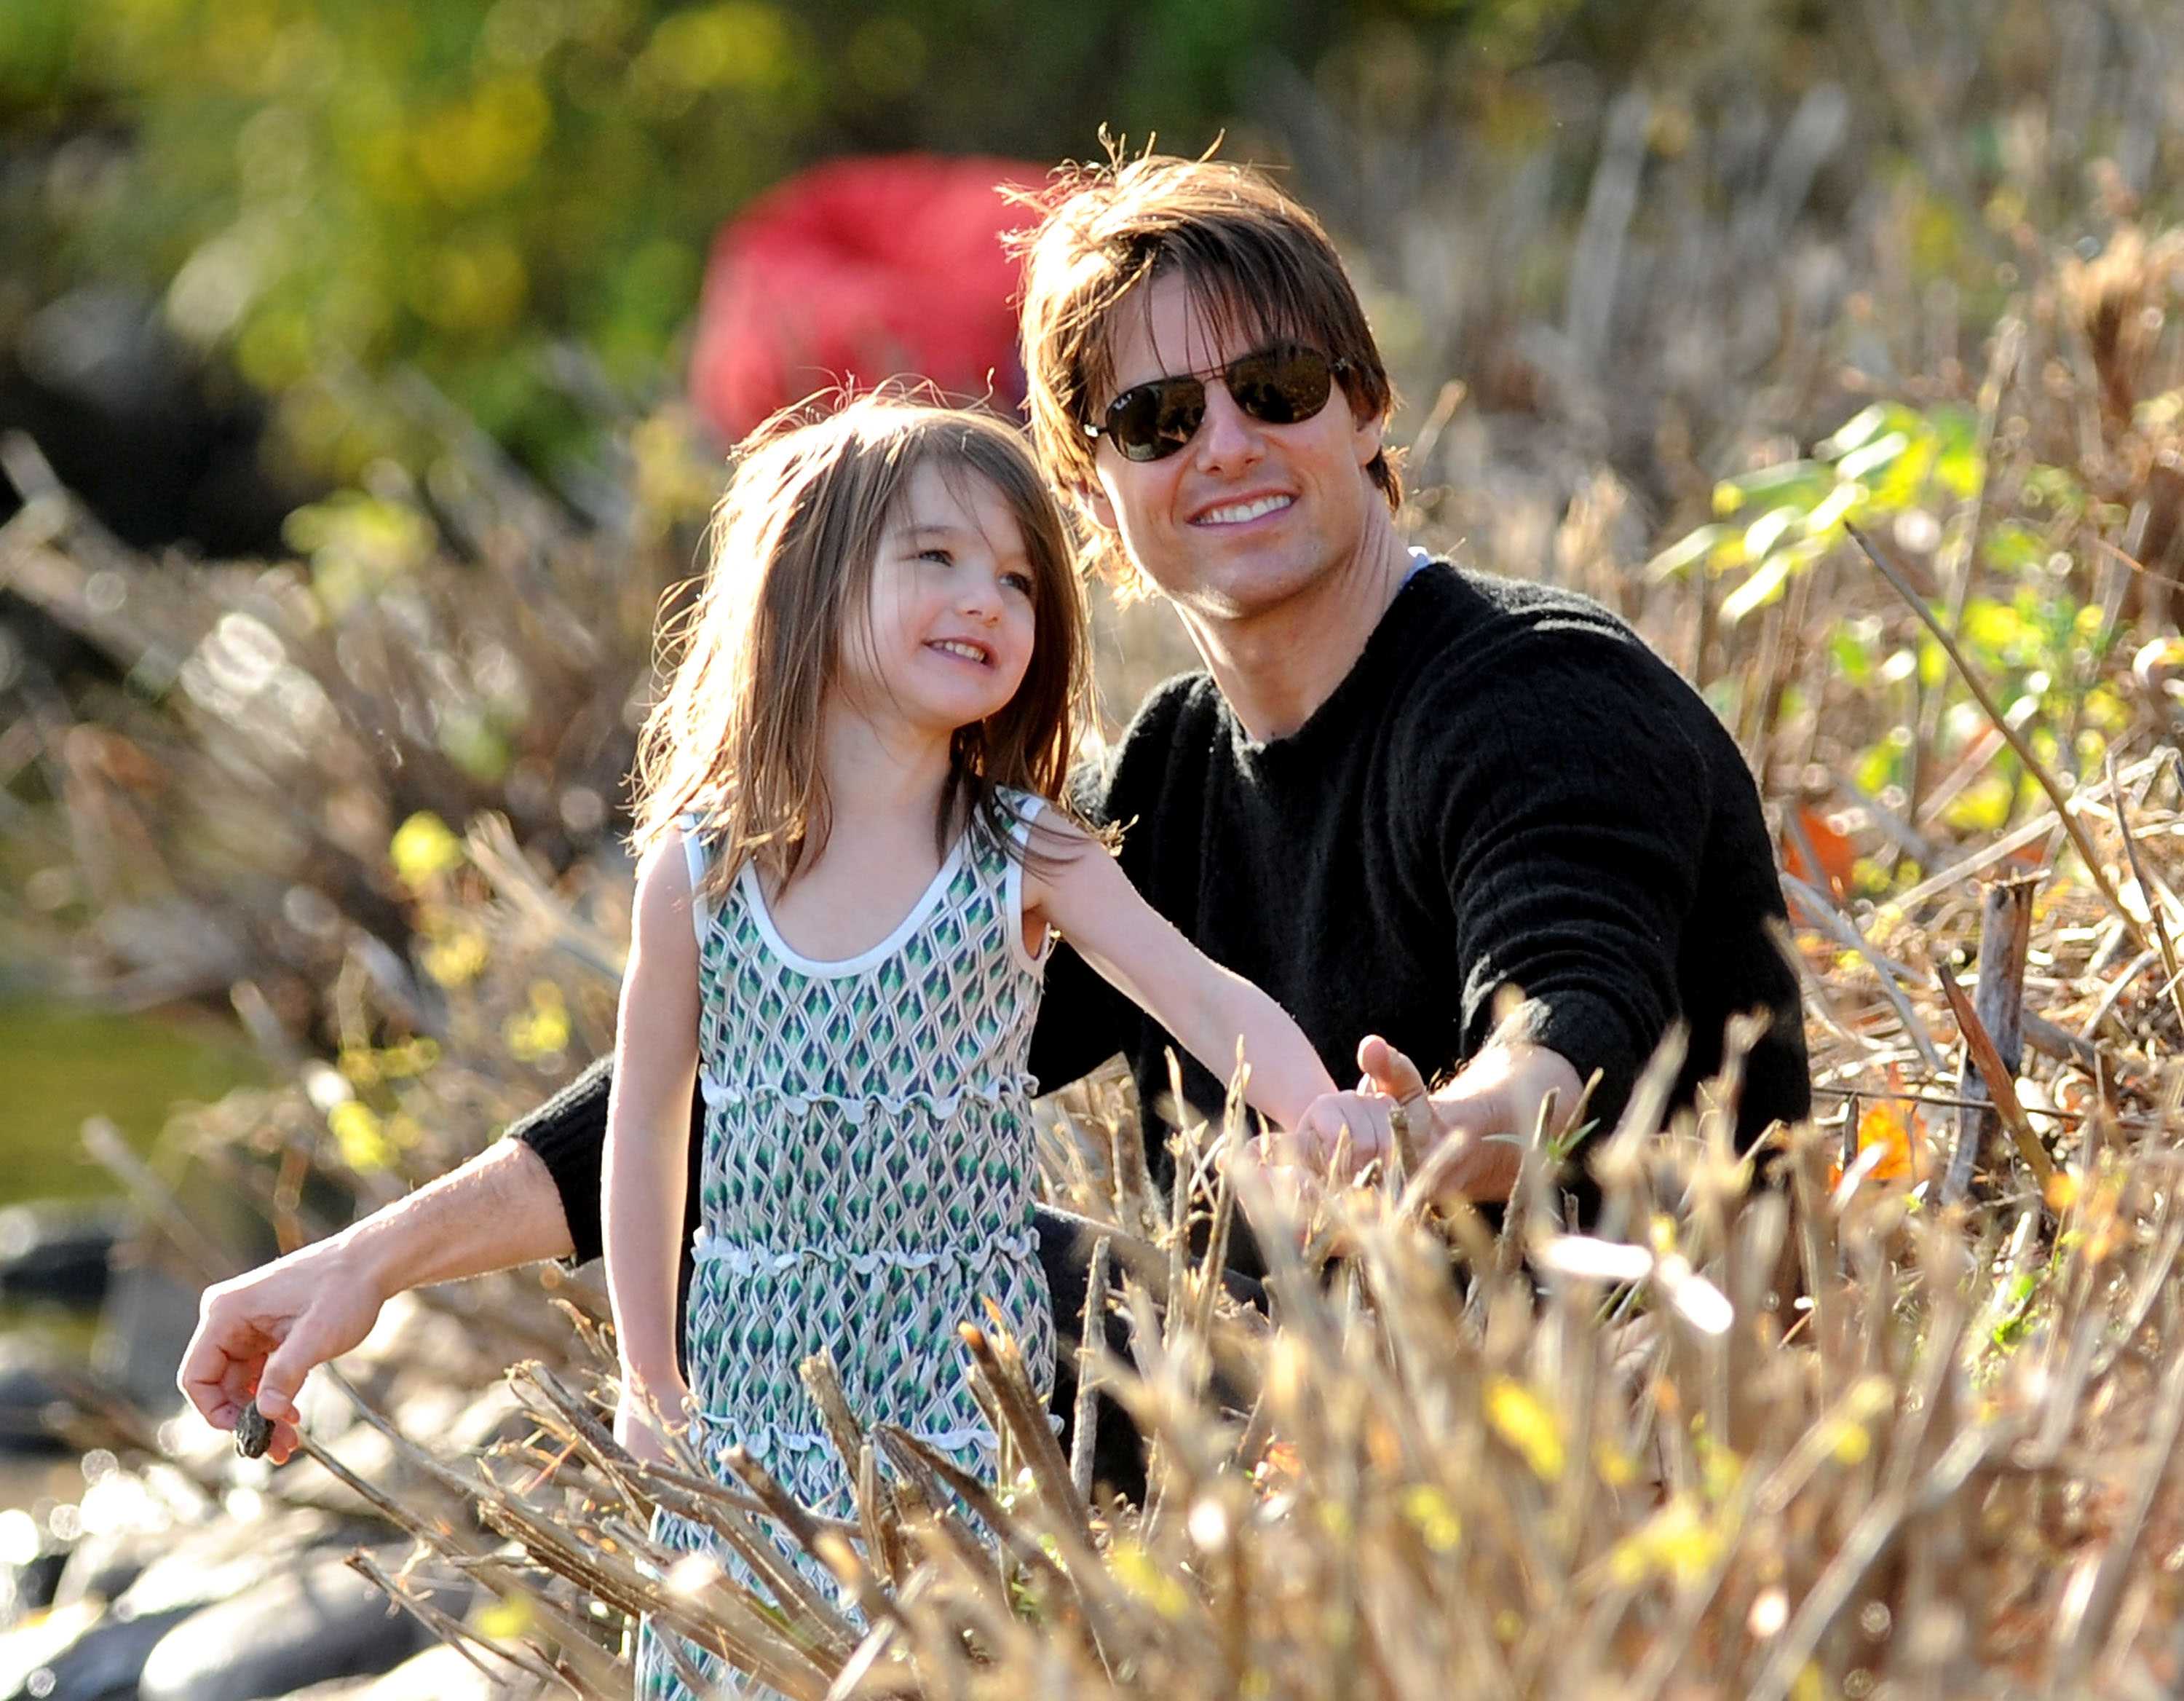 Suri Cruise and Tom Cruise visit Charles River Basin on October 10, 2009 in Cambridge, Massachusetts | Source: Getty Images